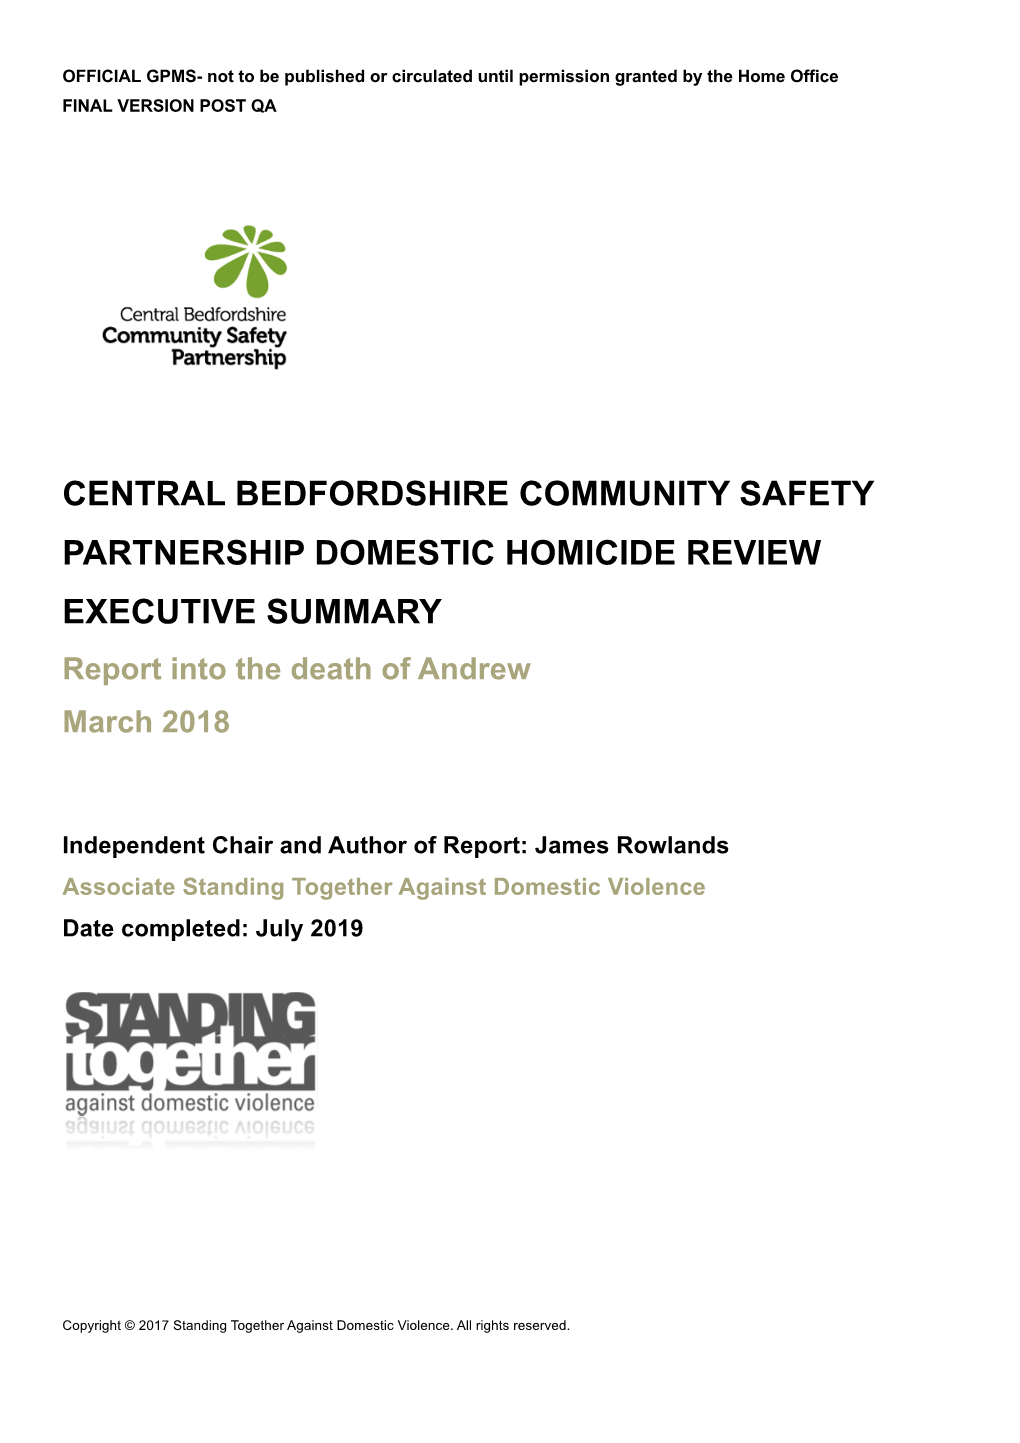 CENTRAL BEDFORDSHIRE COMMUNITY SAFETY PARTNERSHIP DOMESTIC HOMICIDE REVIEW EXECUTIVE SUMMARY Report Into the Death of Andrew March 2018